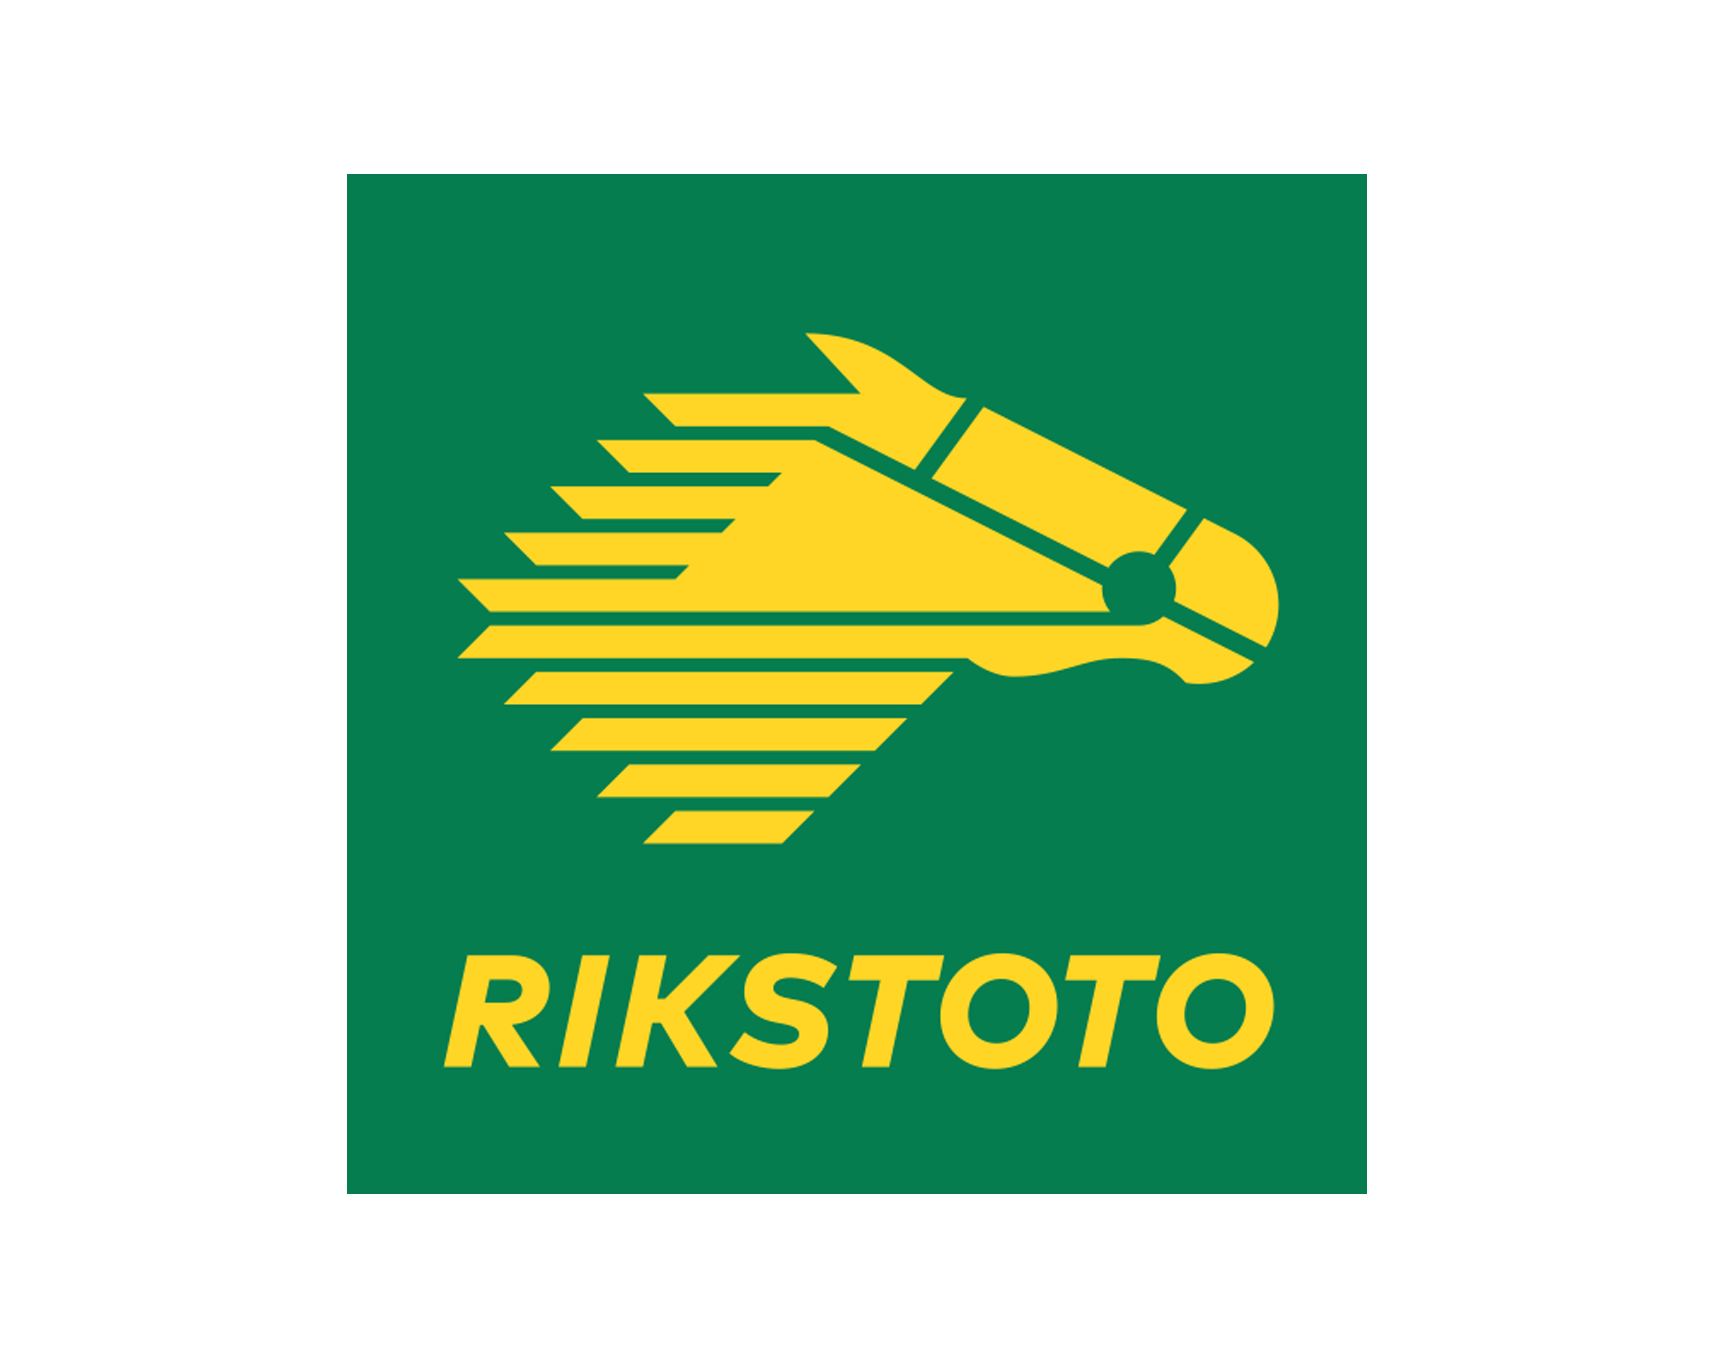 Norsk Rikstoto upgrades protection with Neccton software Mentor